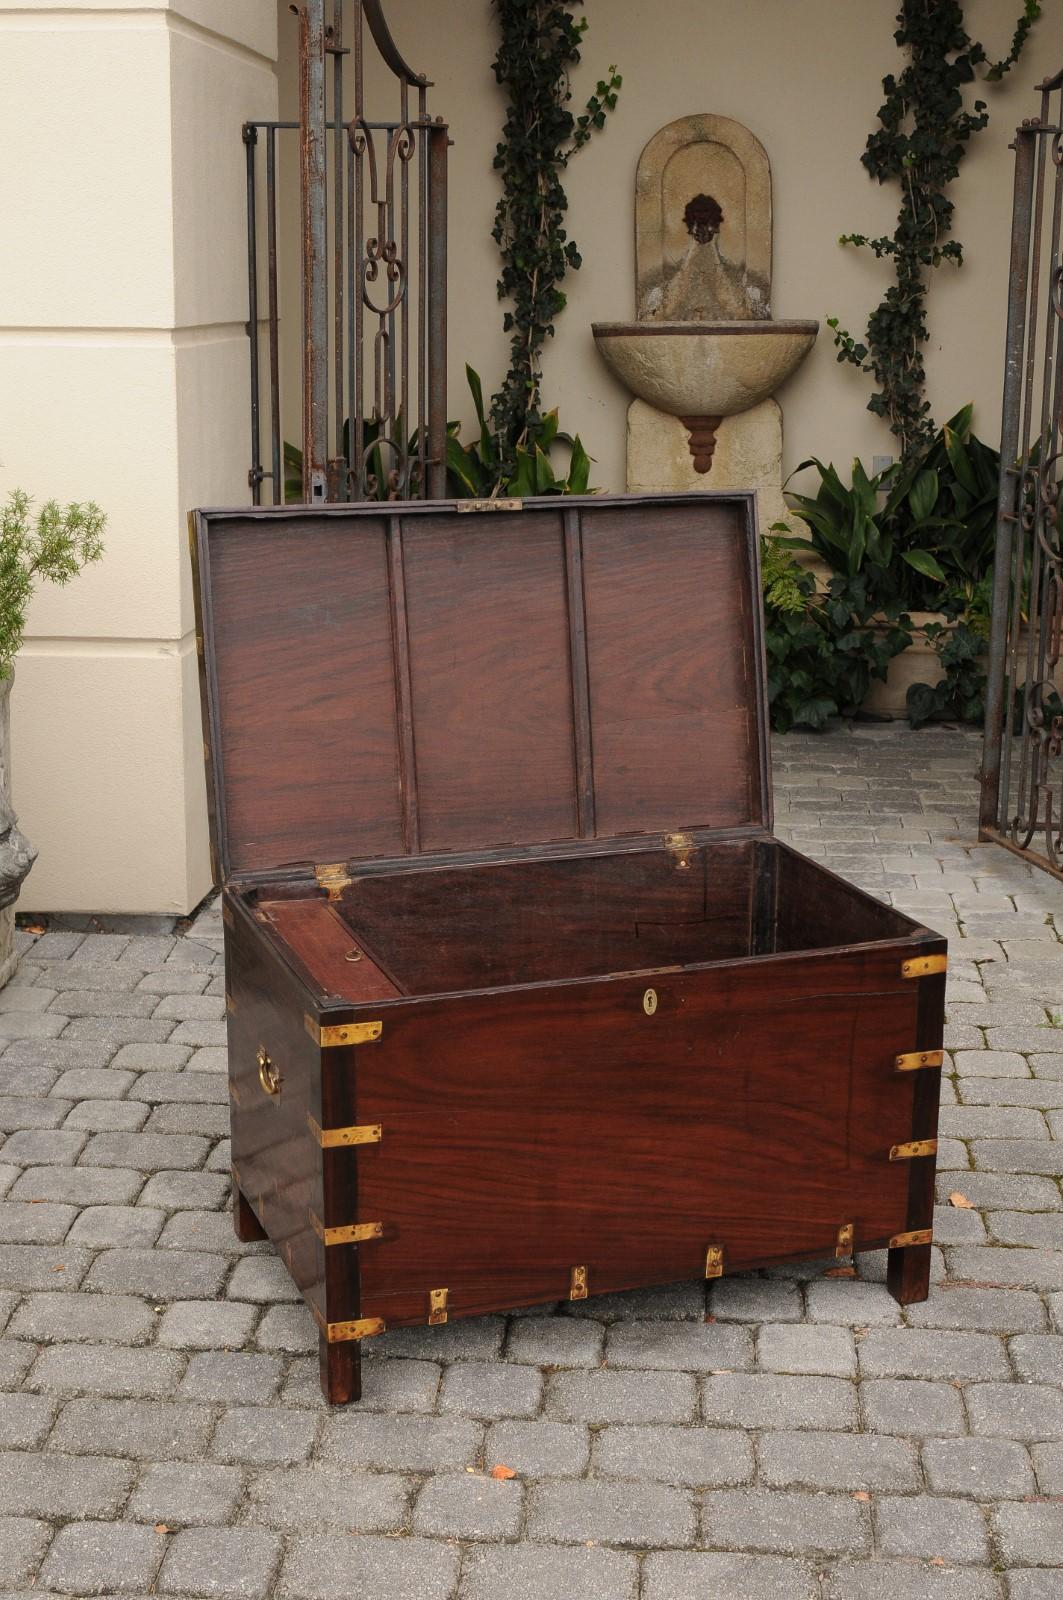 An English mahogany brass-bound Campaign trunk from the second half of the 19th century, with lateral handles. Born during the third quarter of the 19th century, this English Campaign trunk features a stylish linear mahogany structure, accentuated